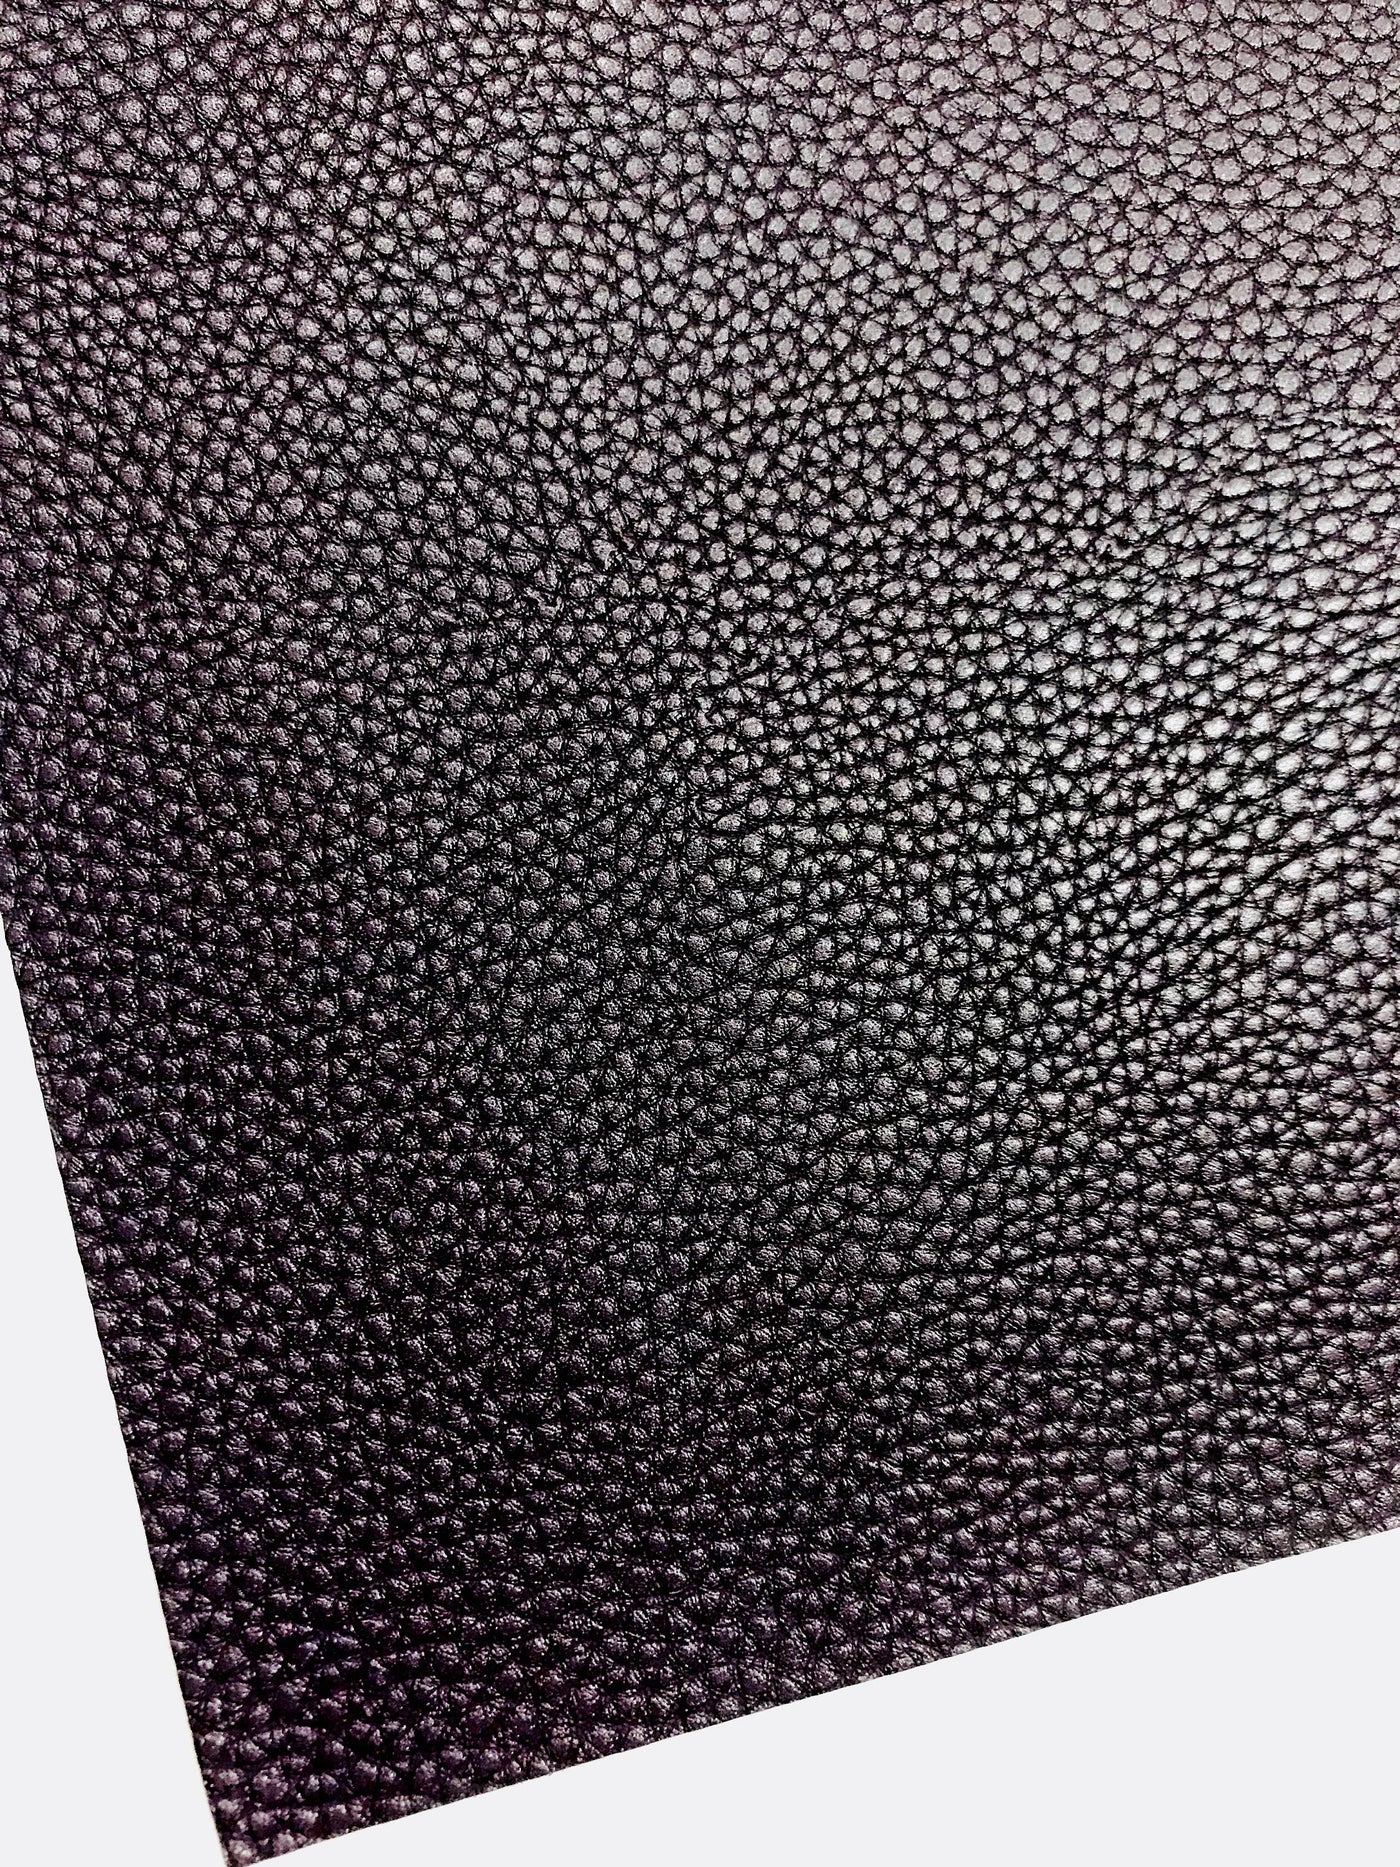 Midnight Purple Textured Leatherette Sheet A4 or A5 Size Thick 1.0mm Litchi Print Leatherette